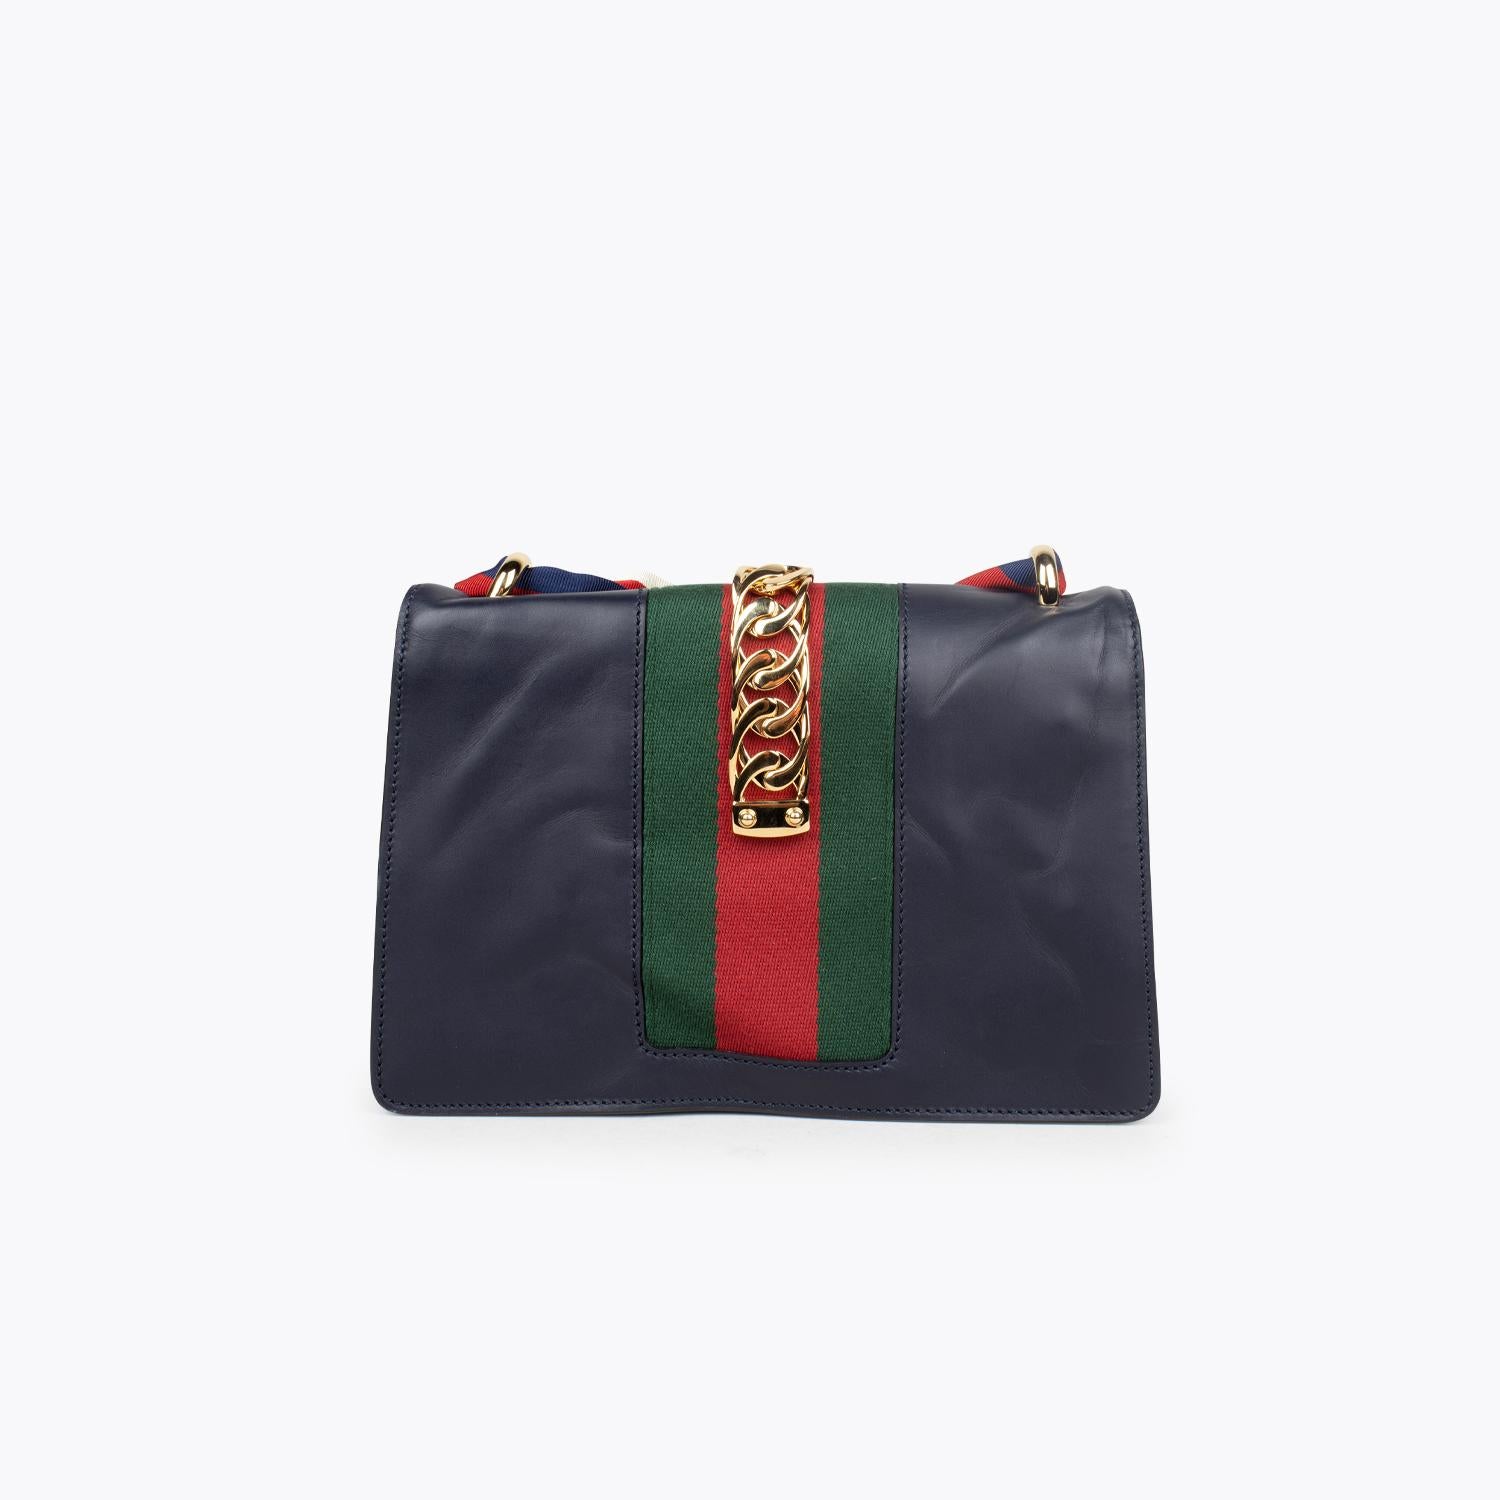 GUCCI Sylvie Small Bag In Good Condition For Sale In Sundbyberg, SE